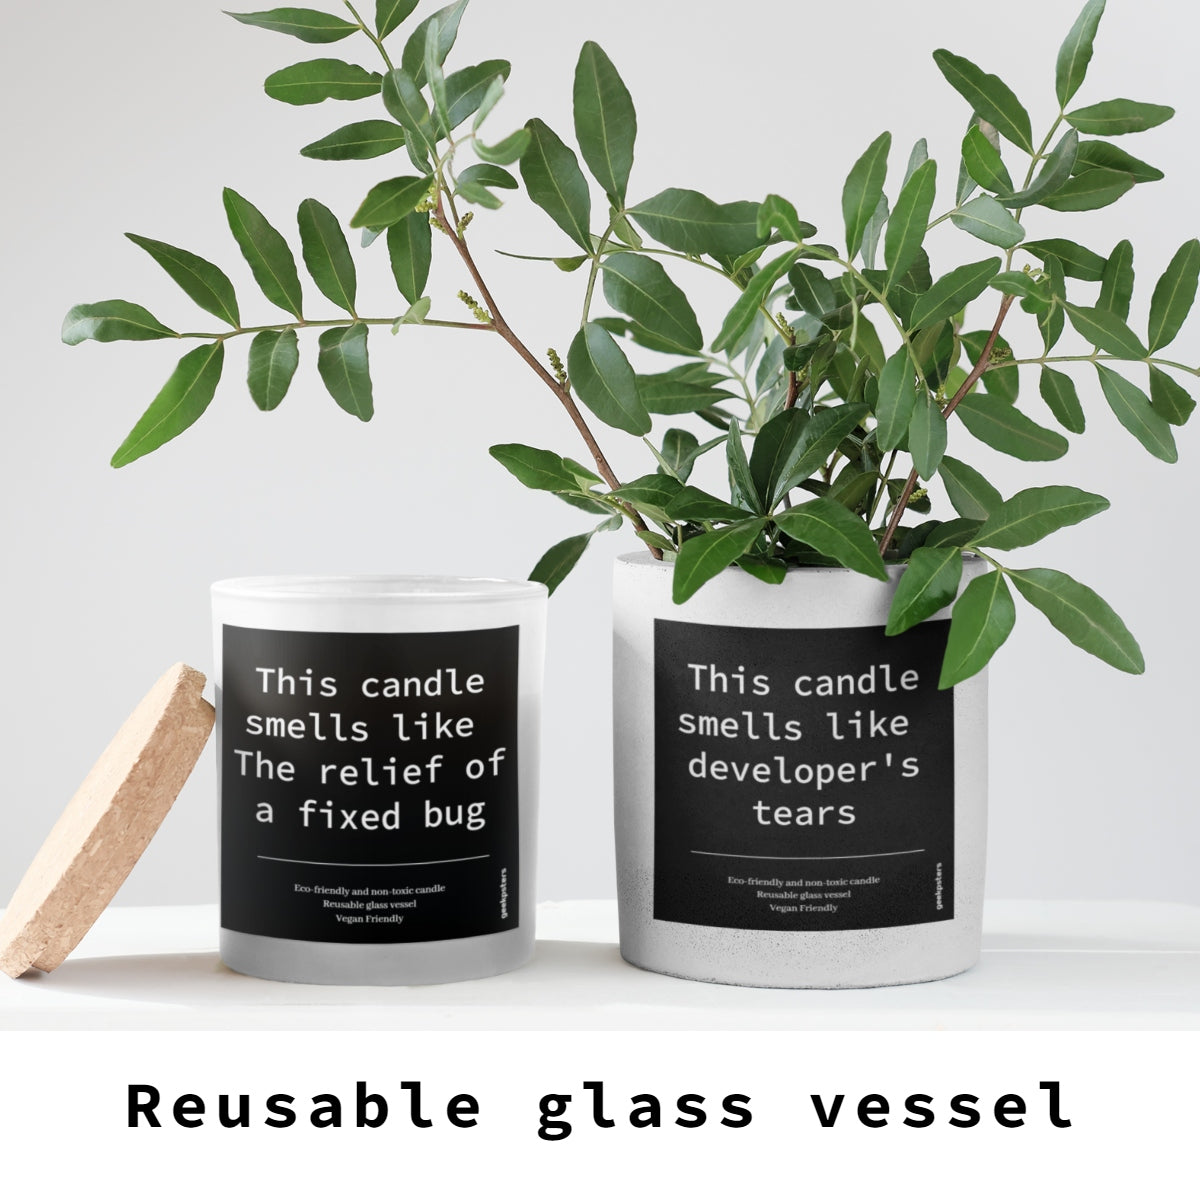 Two Code Committed to Master- Scented Soy Candles with humorous labels in reusable glass jars, accompanied by a plant branch and a piece of wood, on a gray background.